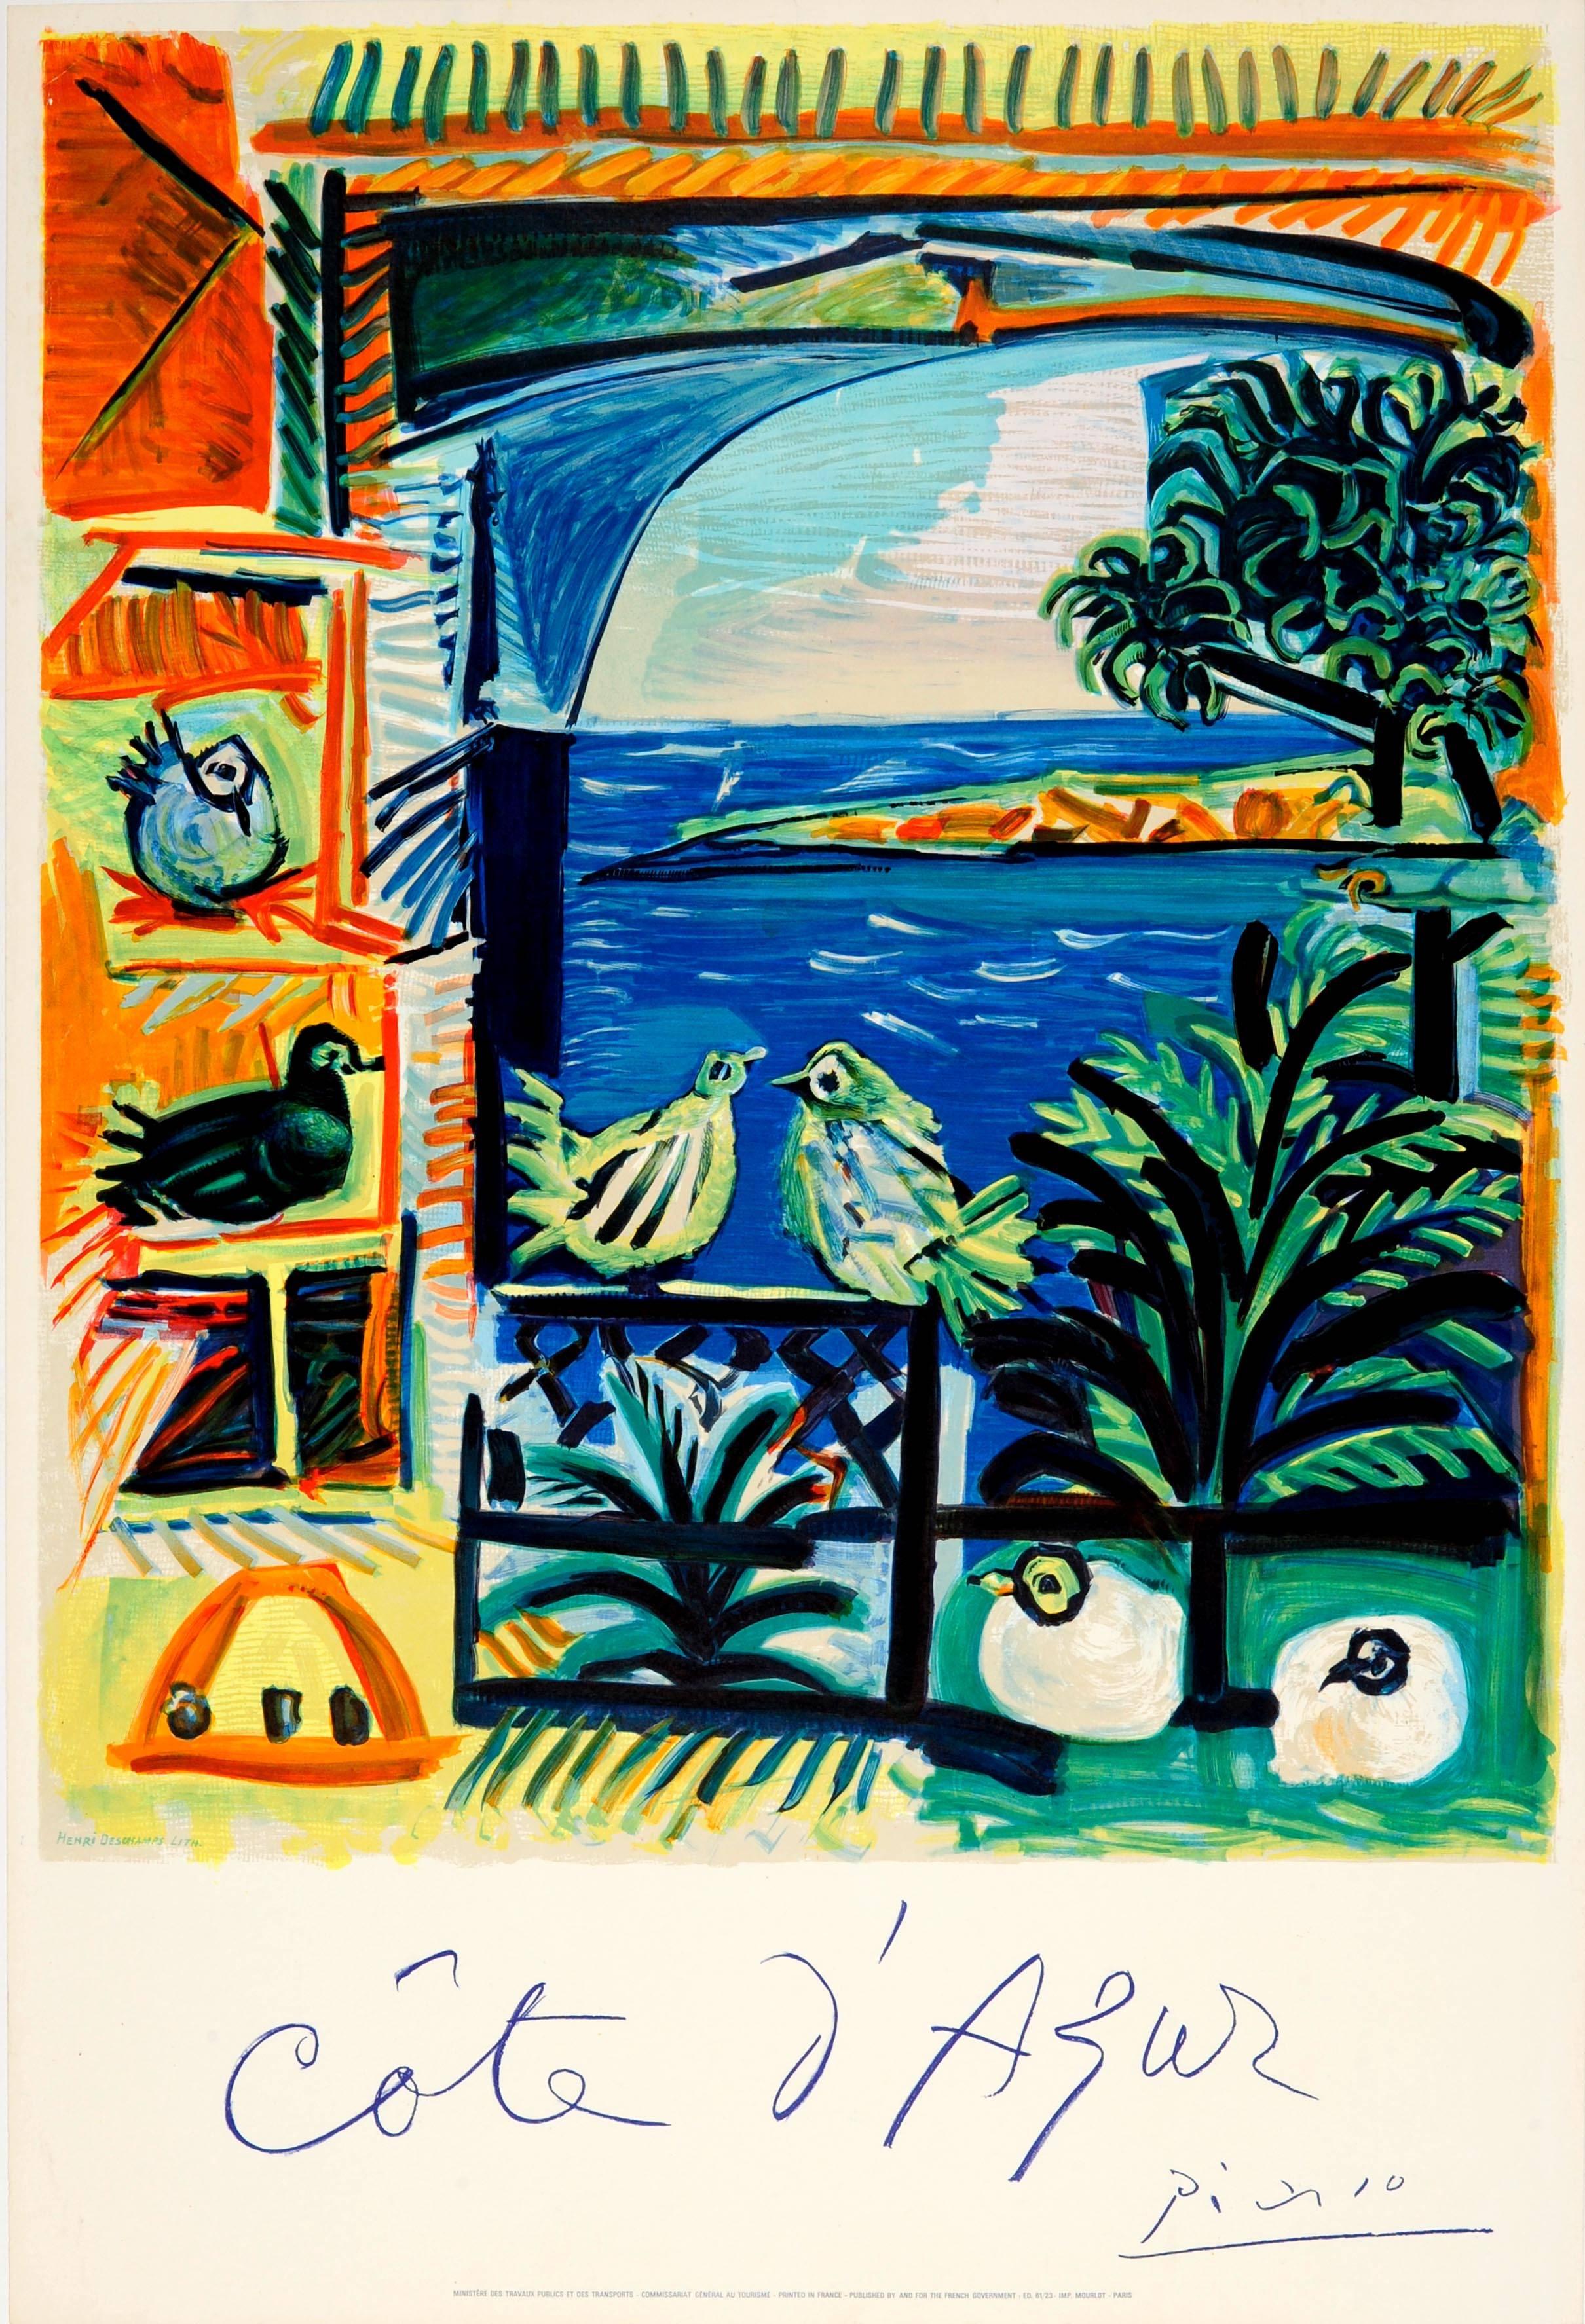 Original 1962 Travel Poster By Pablo Picasso For The Cote d'Azur French Riviera 